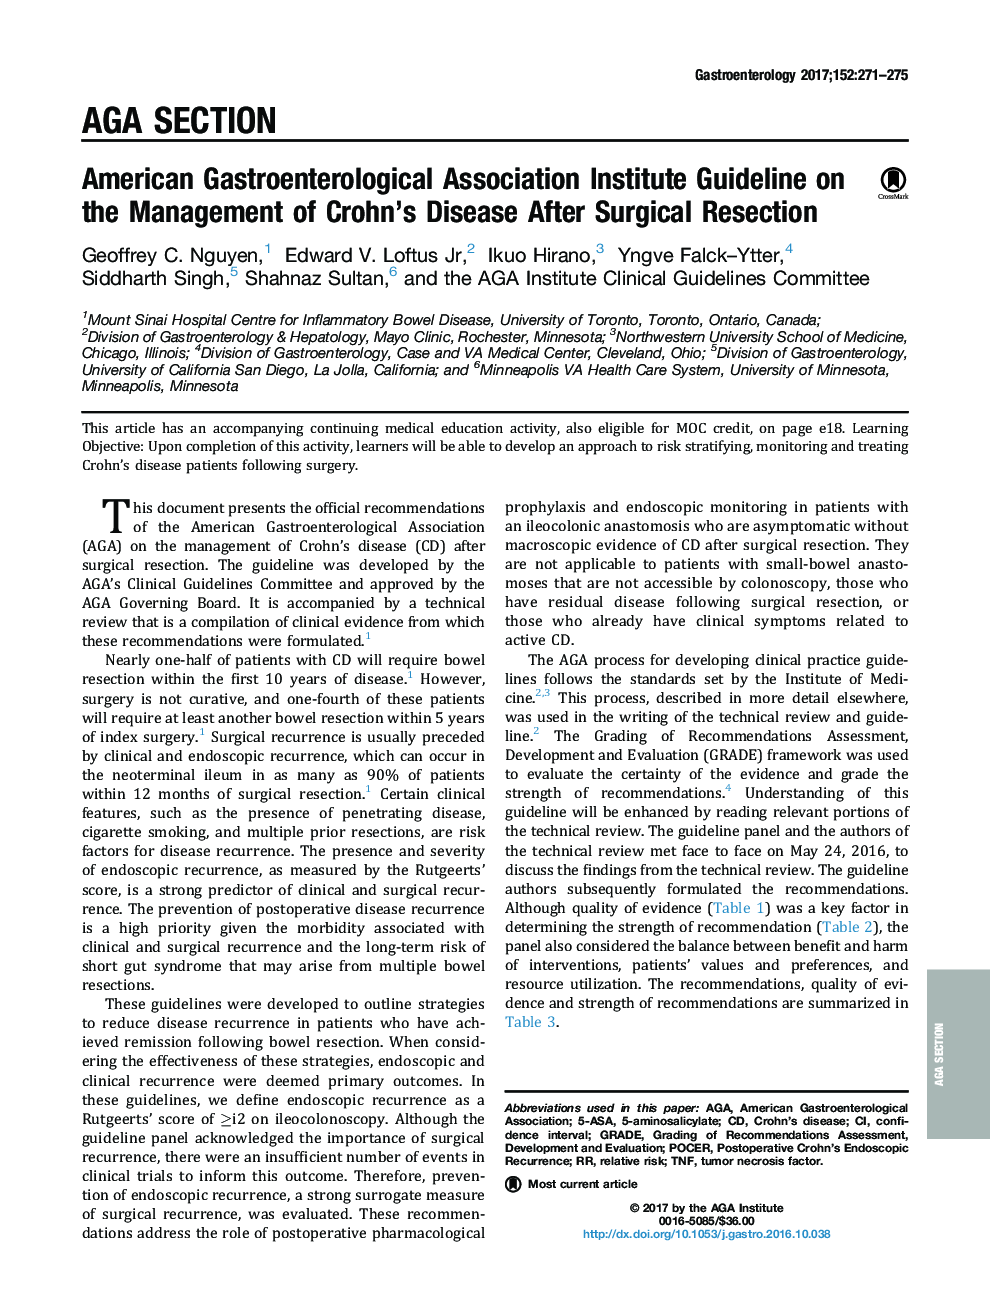 American Gastroenterological Association Institute Guideline on the Management of Crohn's Disease After Surgical Resection